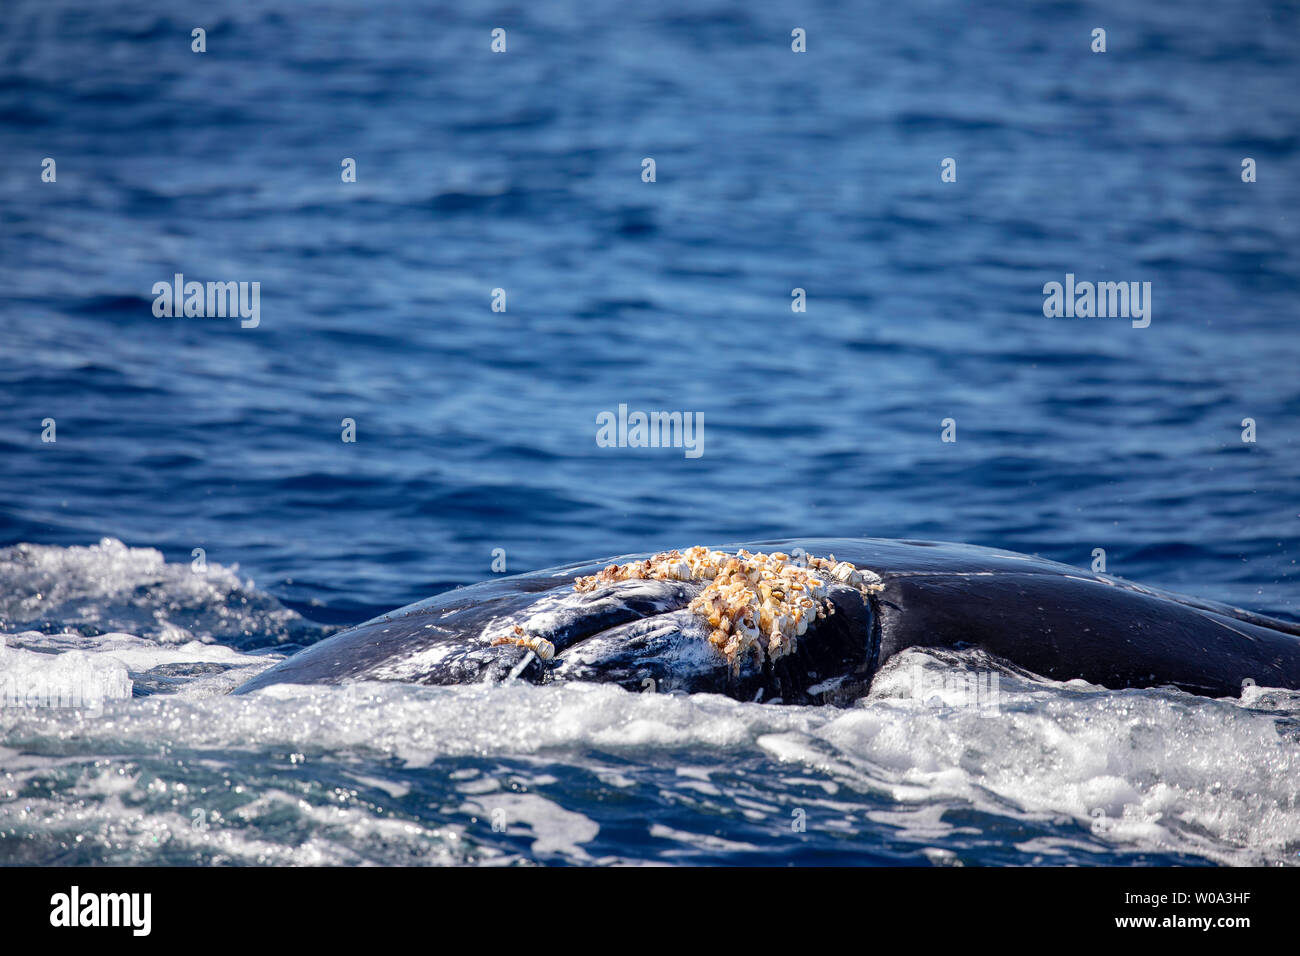 Acorn barnacles, Coronula diaderma, and goose neck barnacles, Conchorderma auritum, attached near the genital area of this male humpback whale, Megapt Stock Photo